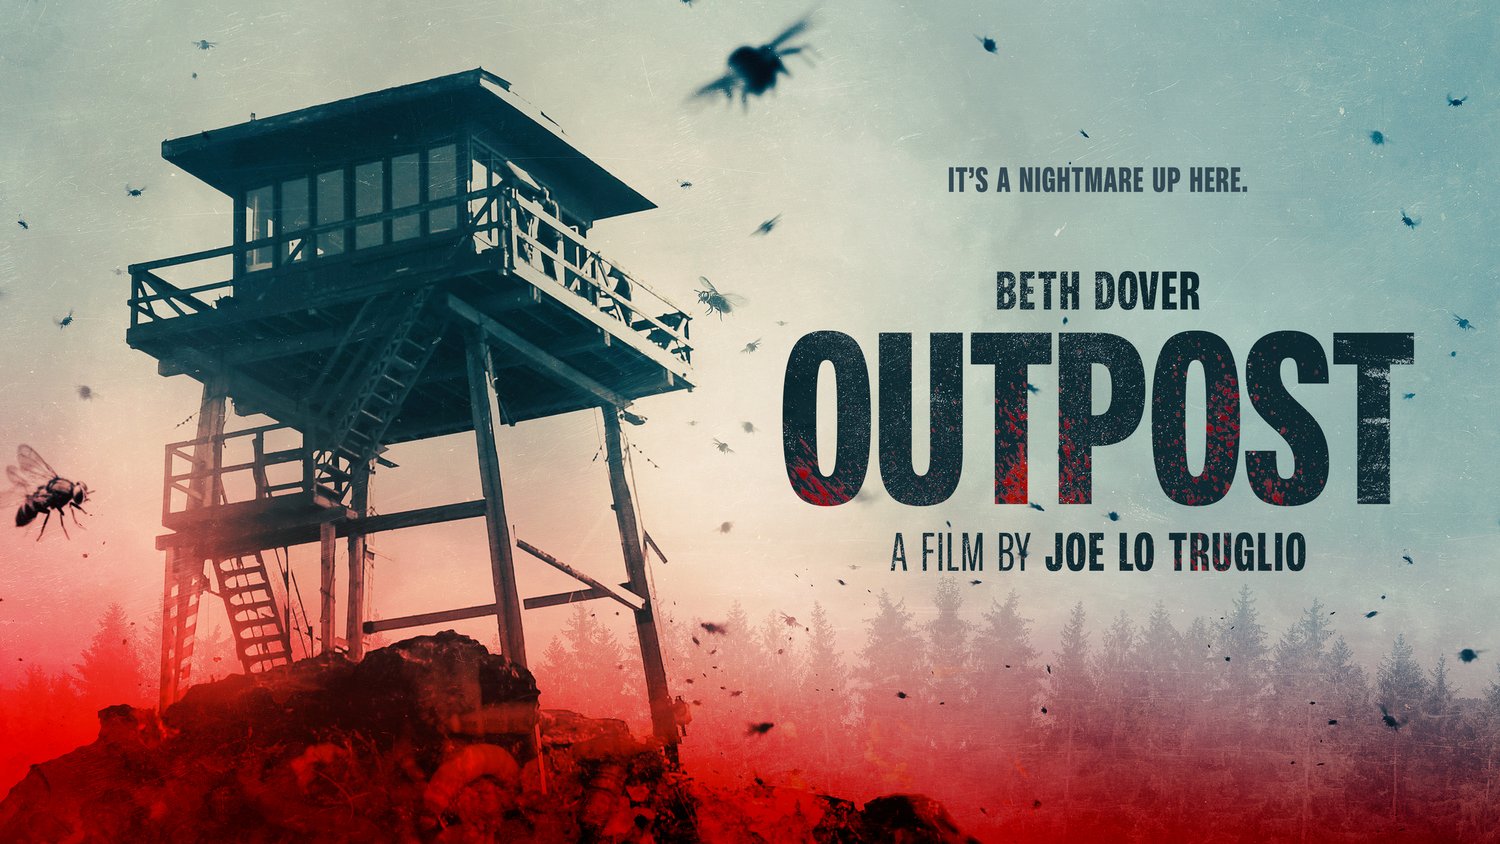 Art poster the Outpost.